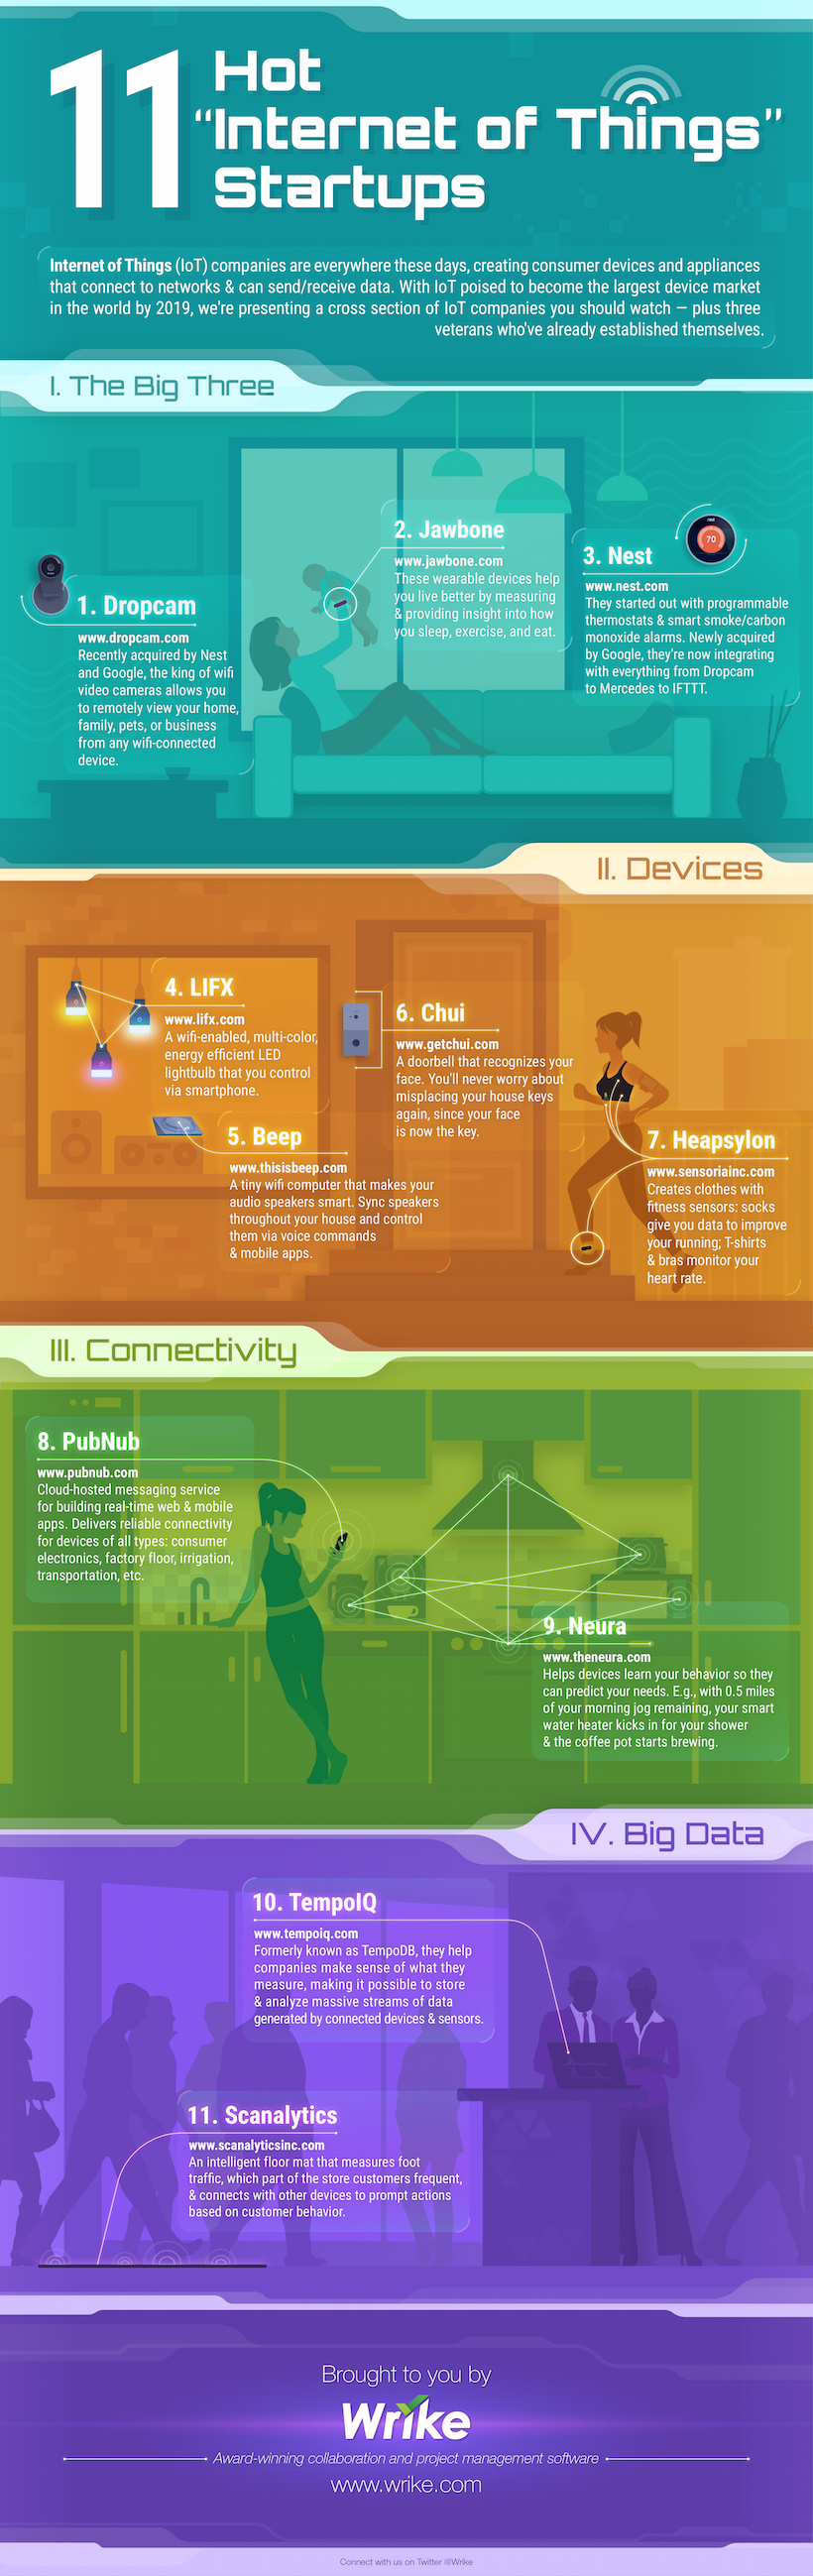 11 "Internet of Things" Startups to Watch (Infographic)